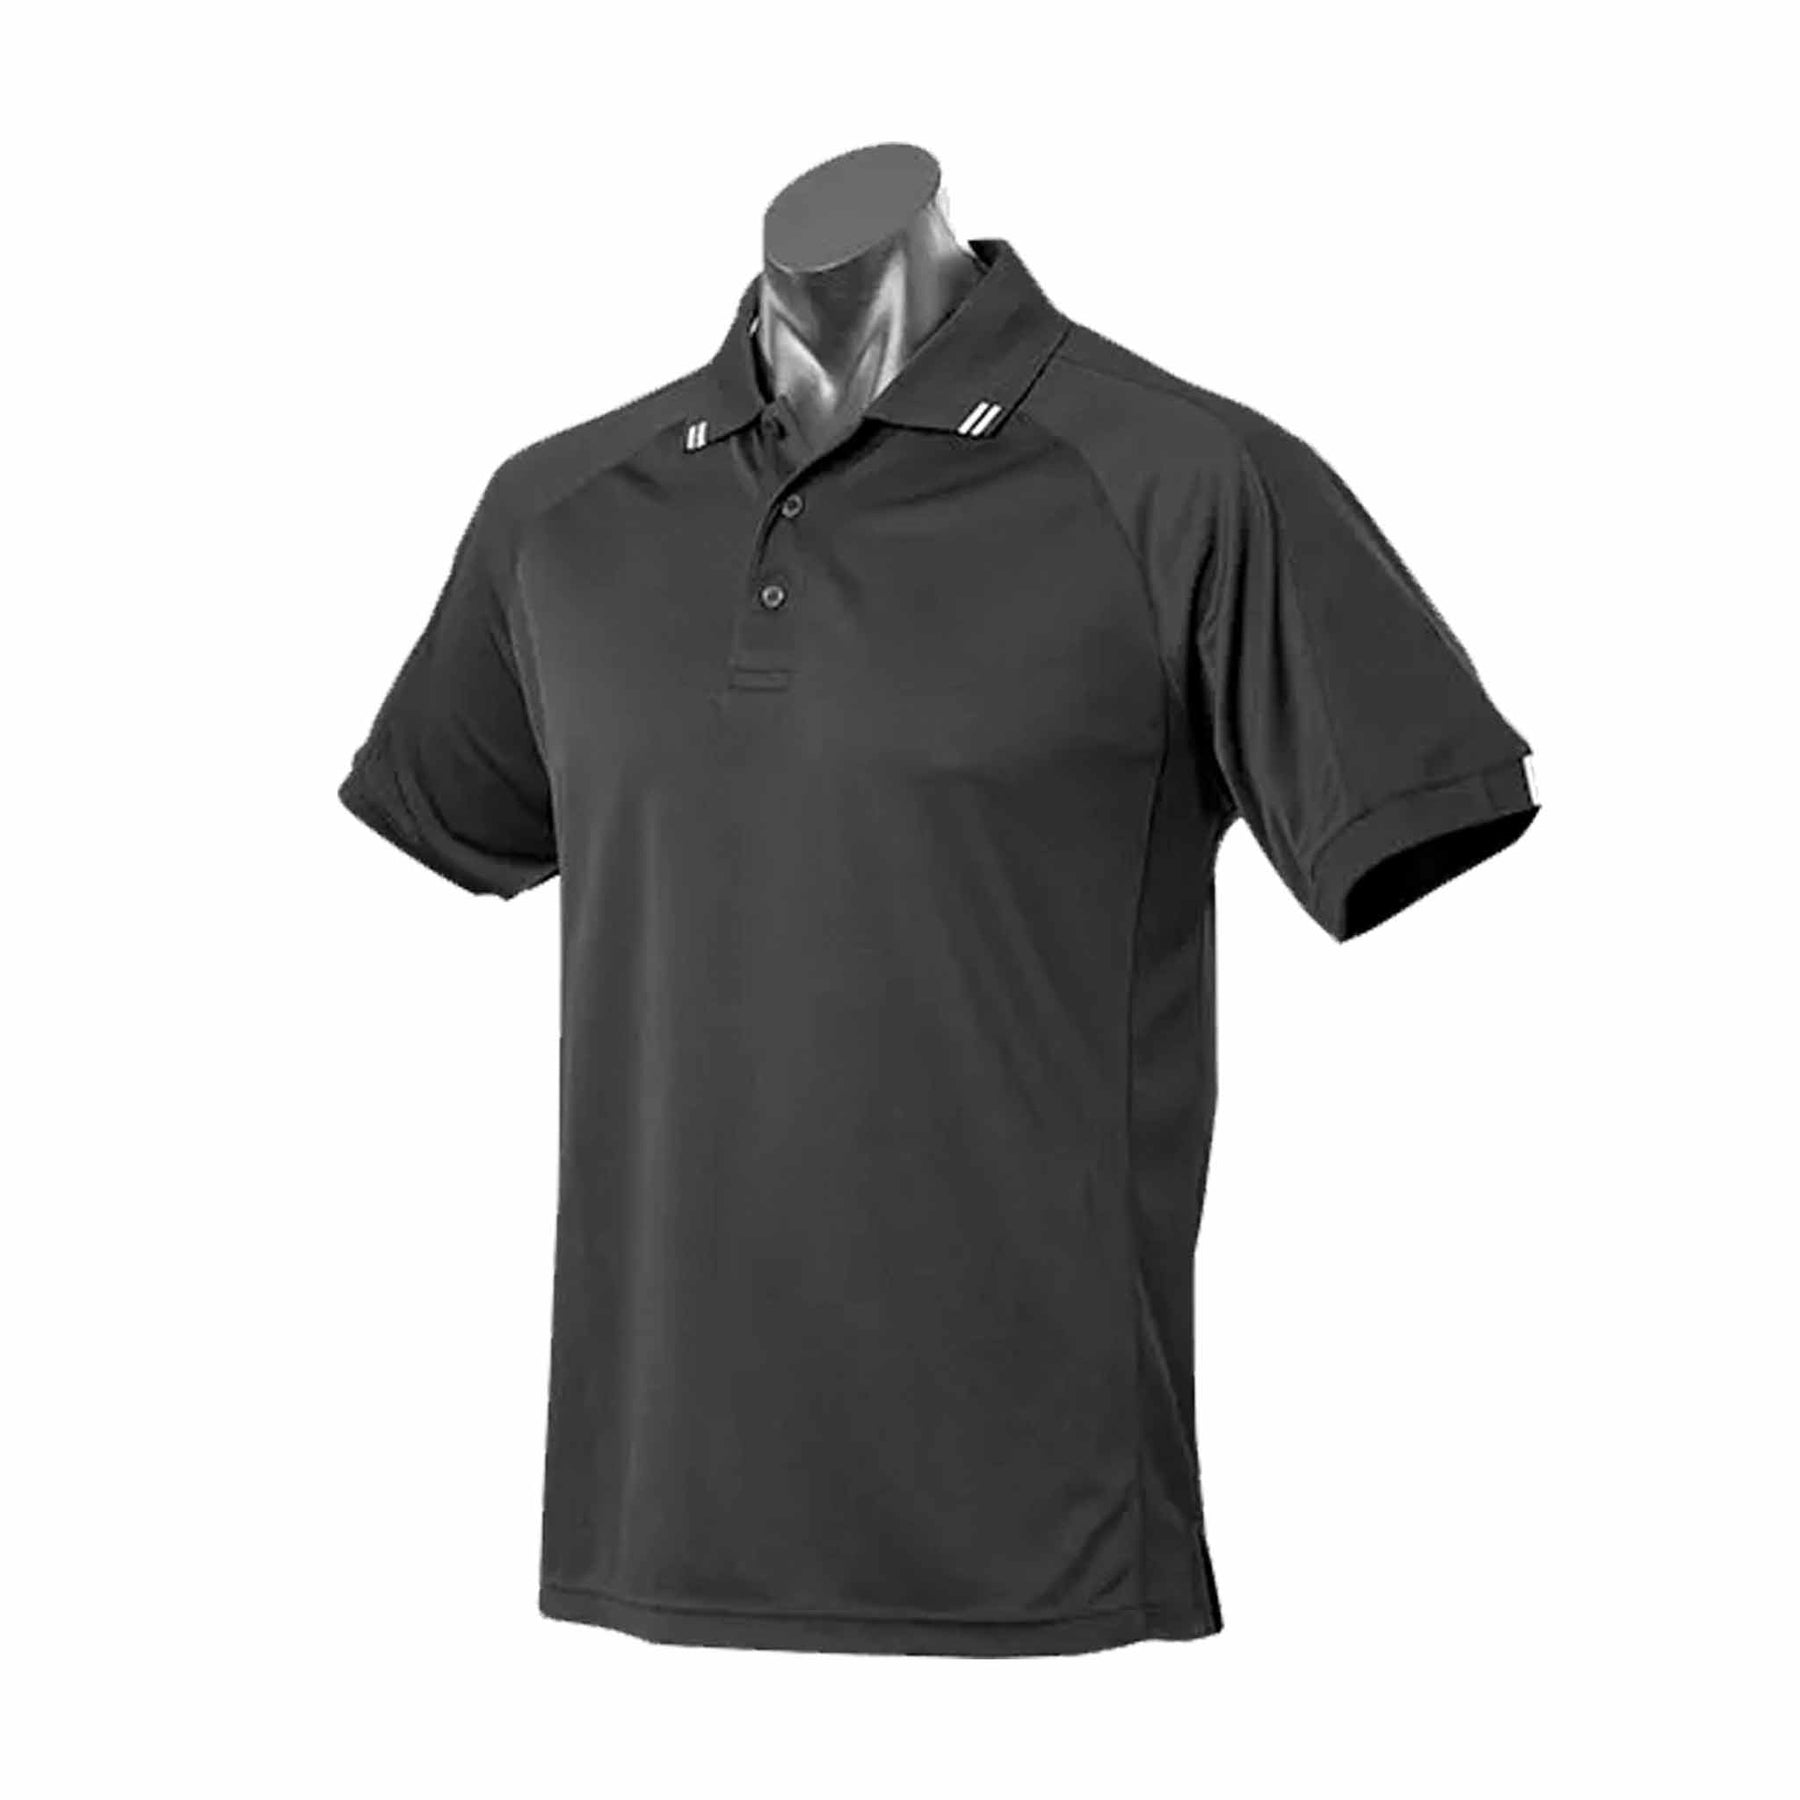 aussie pacific flinders polo in black white